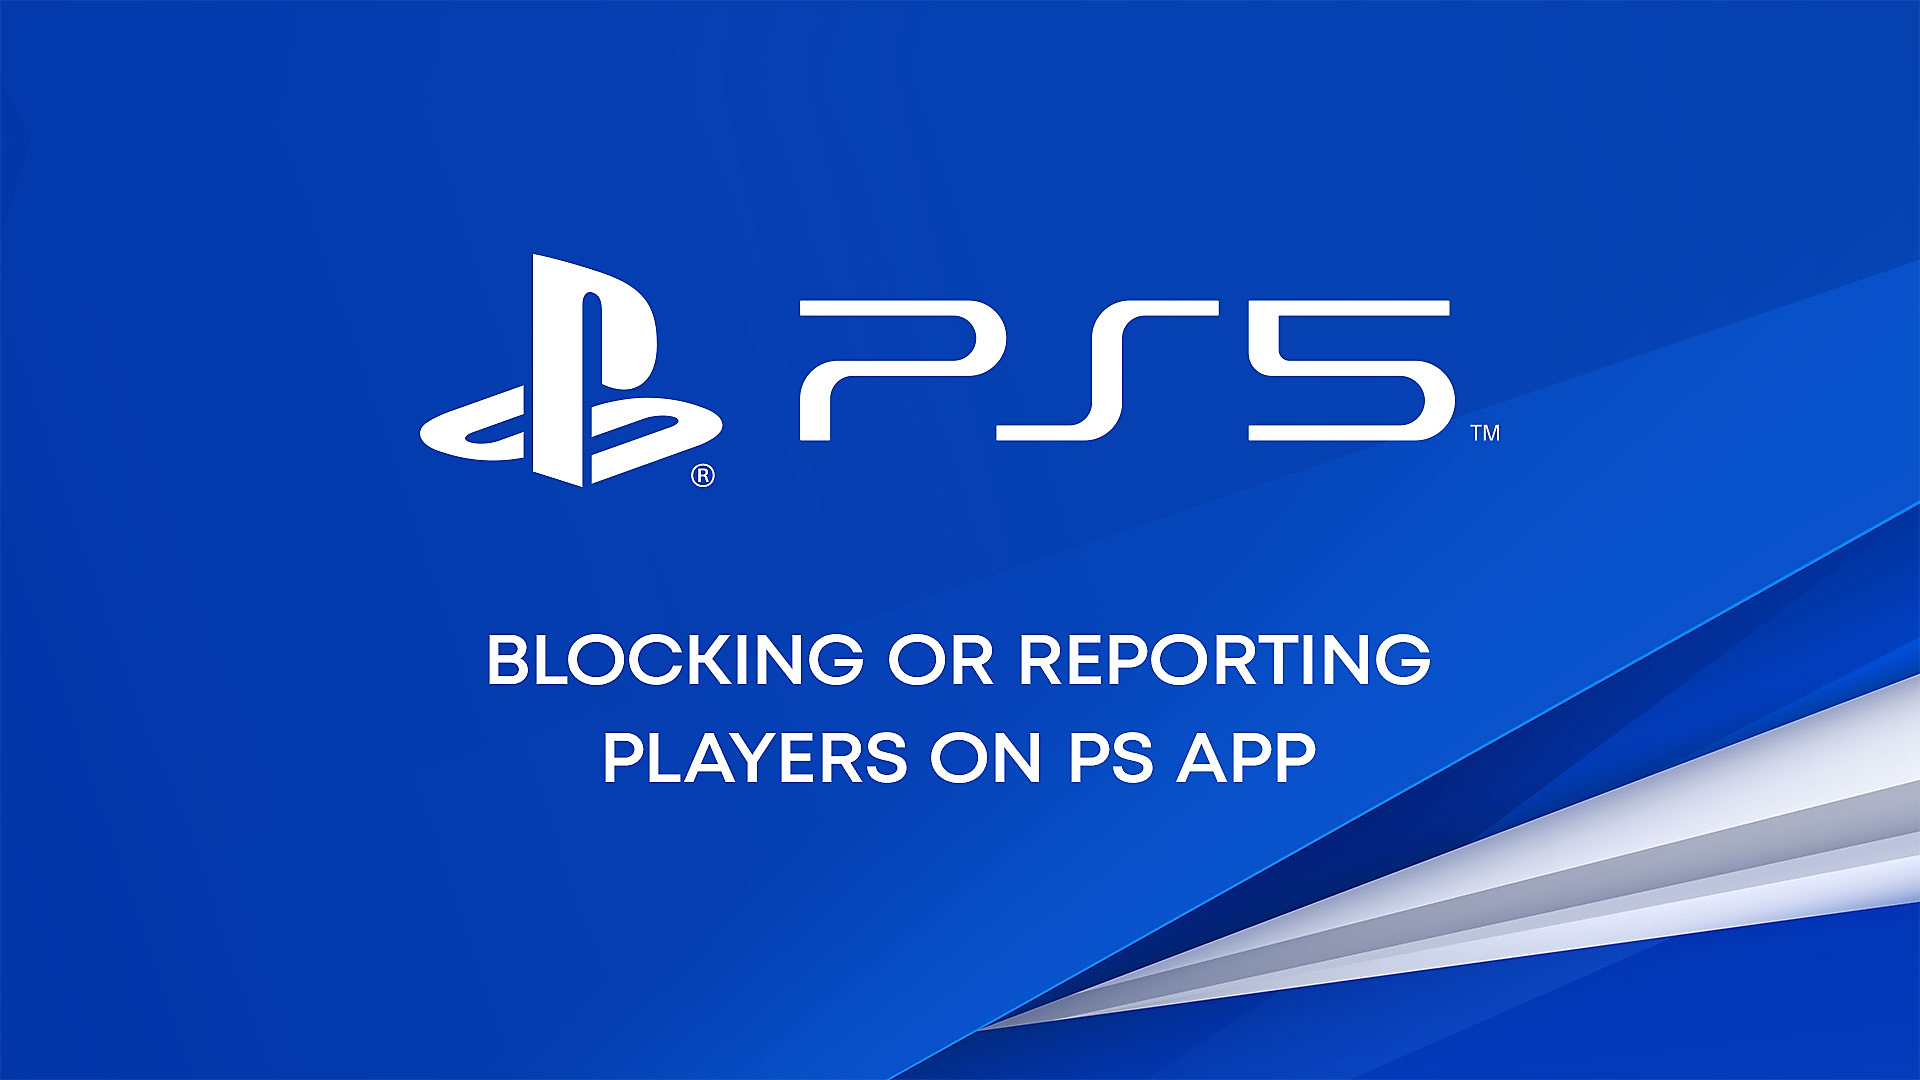 Youtube video about how to block or report players on PS App.